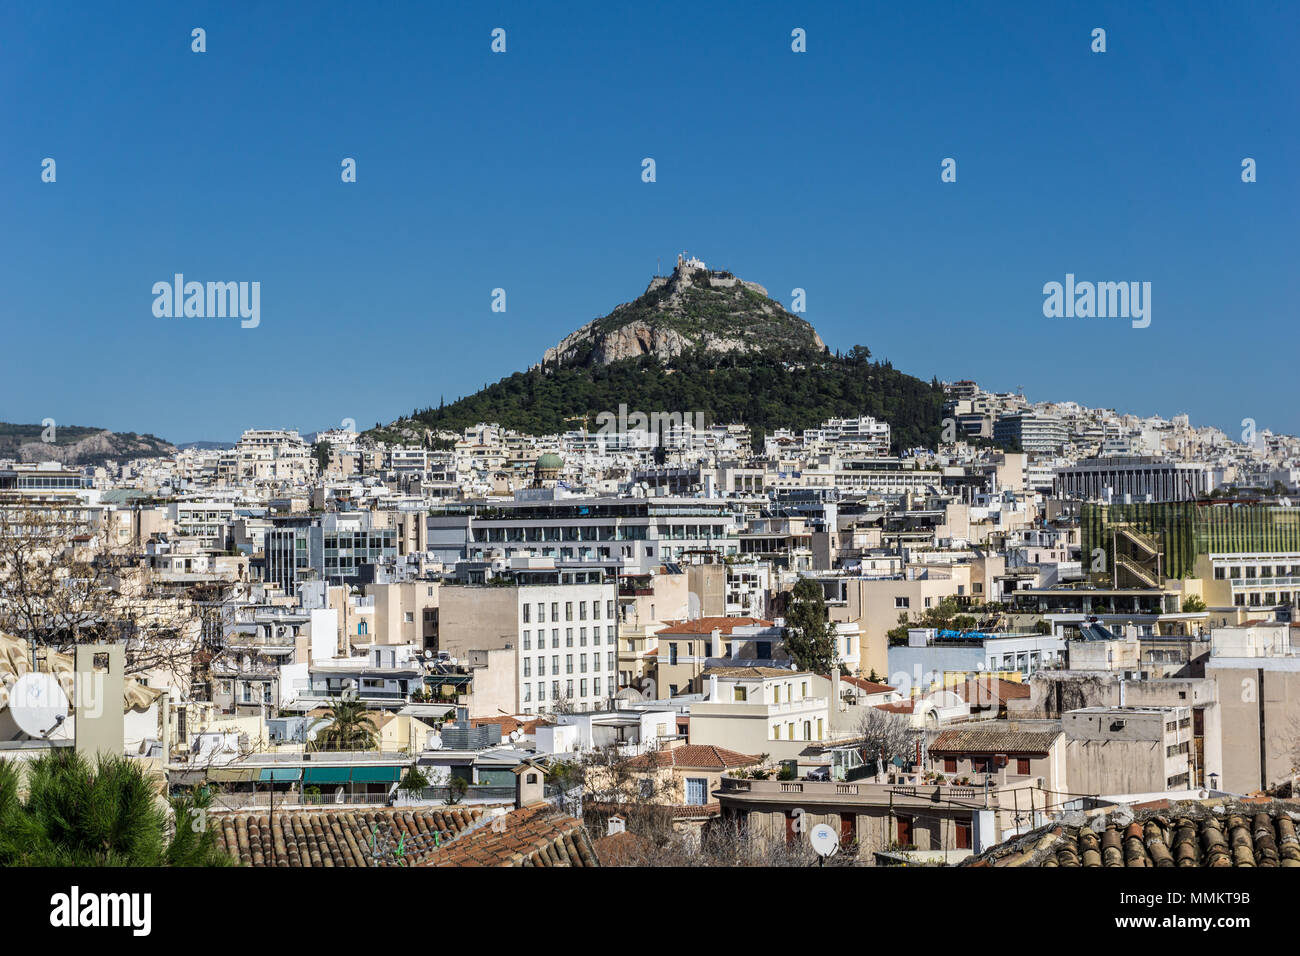 Panoramic view of Lycabettus hill (Lykavittos) in the city of Athens Greece. The hill has a large open-air amphitheater at the top Stock Photo